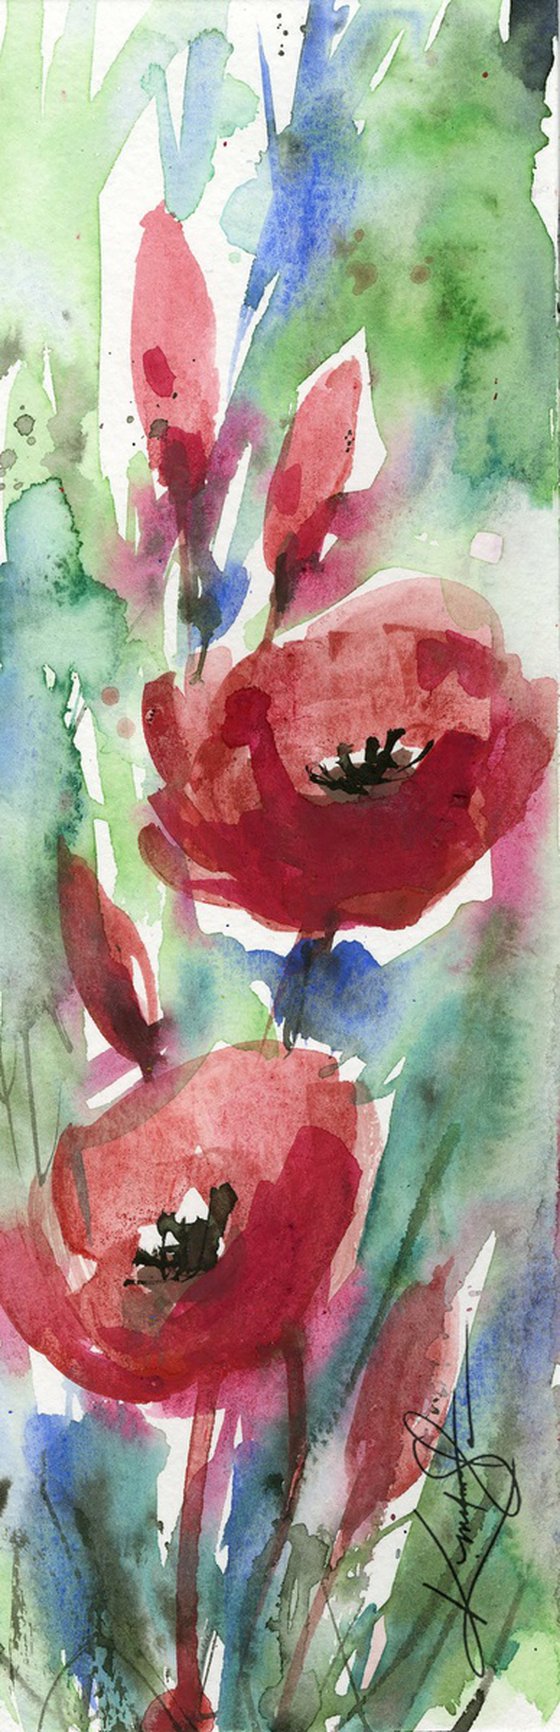 Poppy Love Collection 4 -  3 Watercolor Flower Paintings by Kathy Morton Stanion